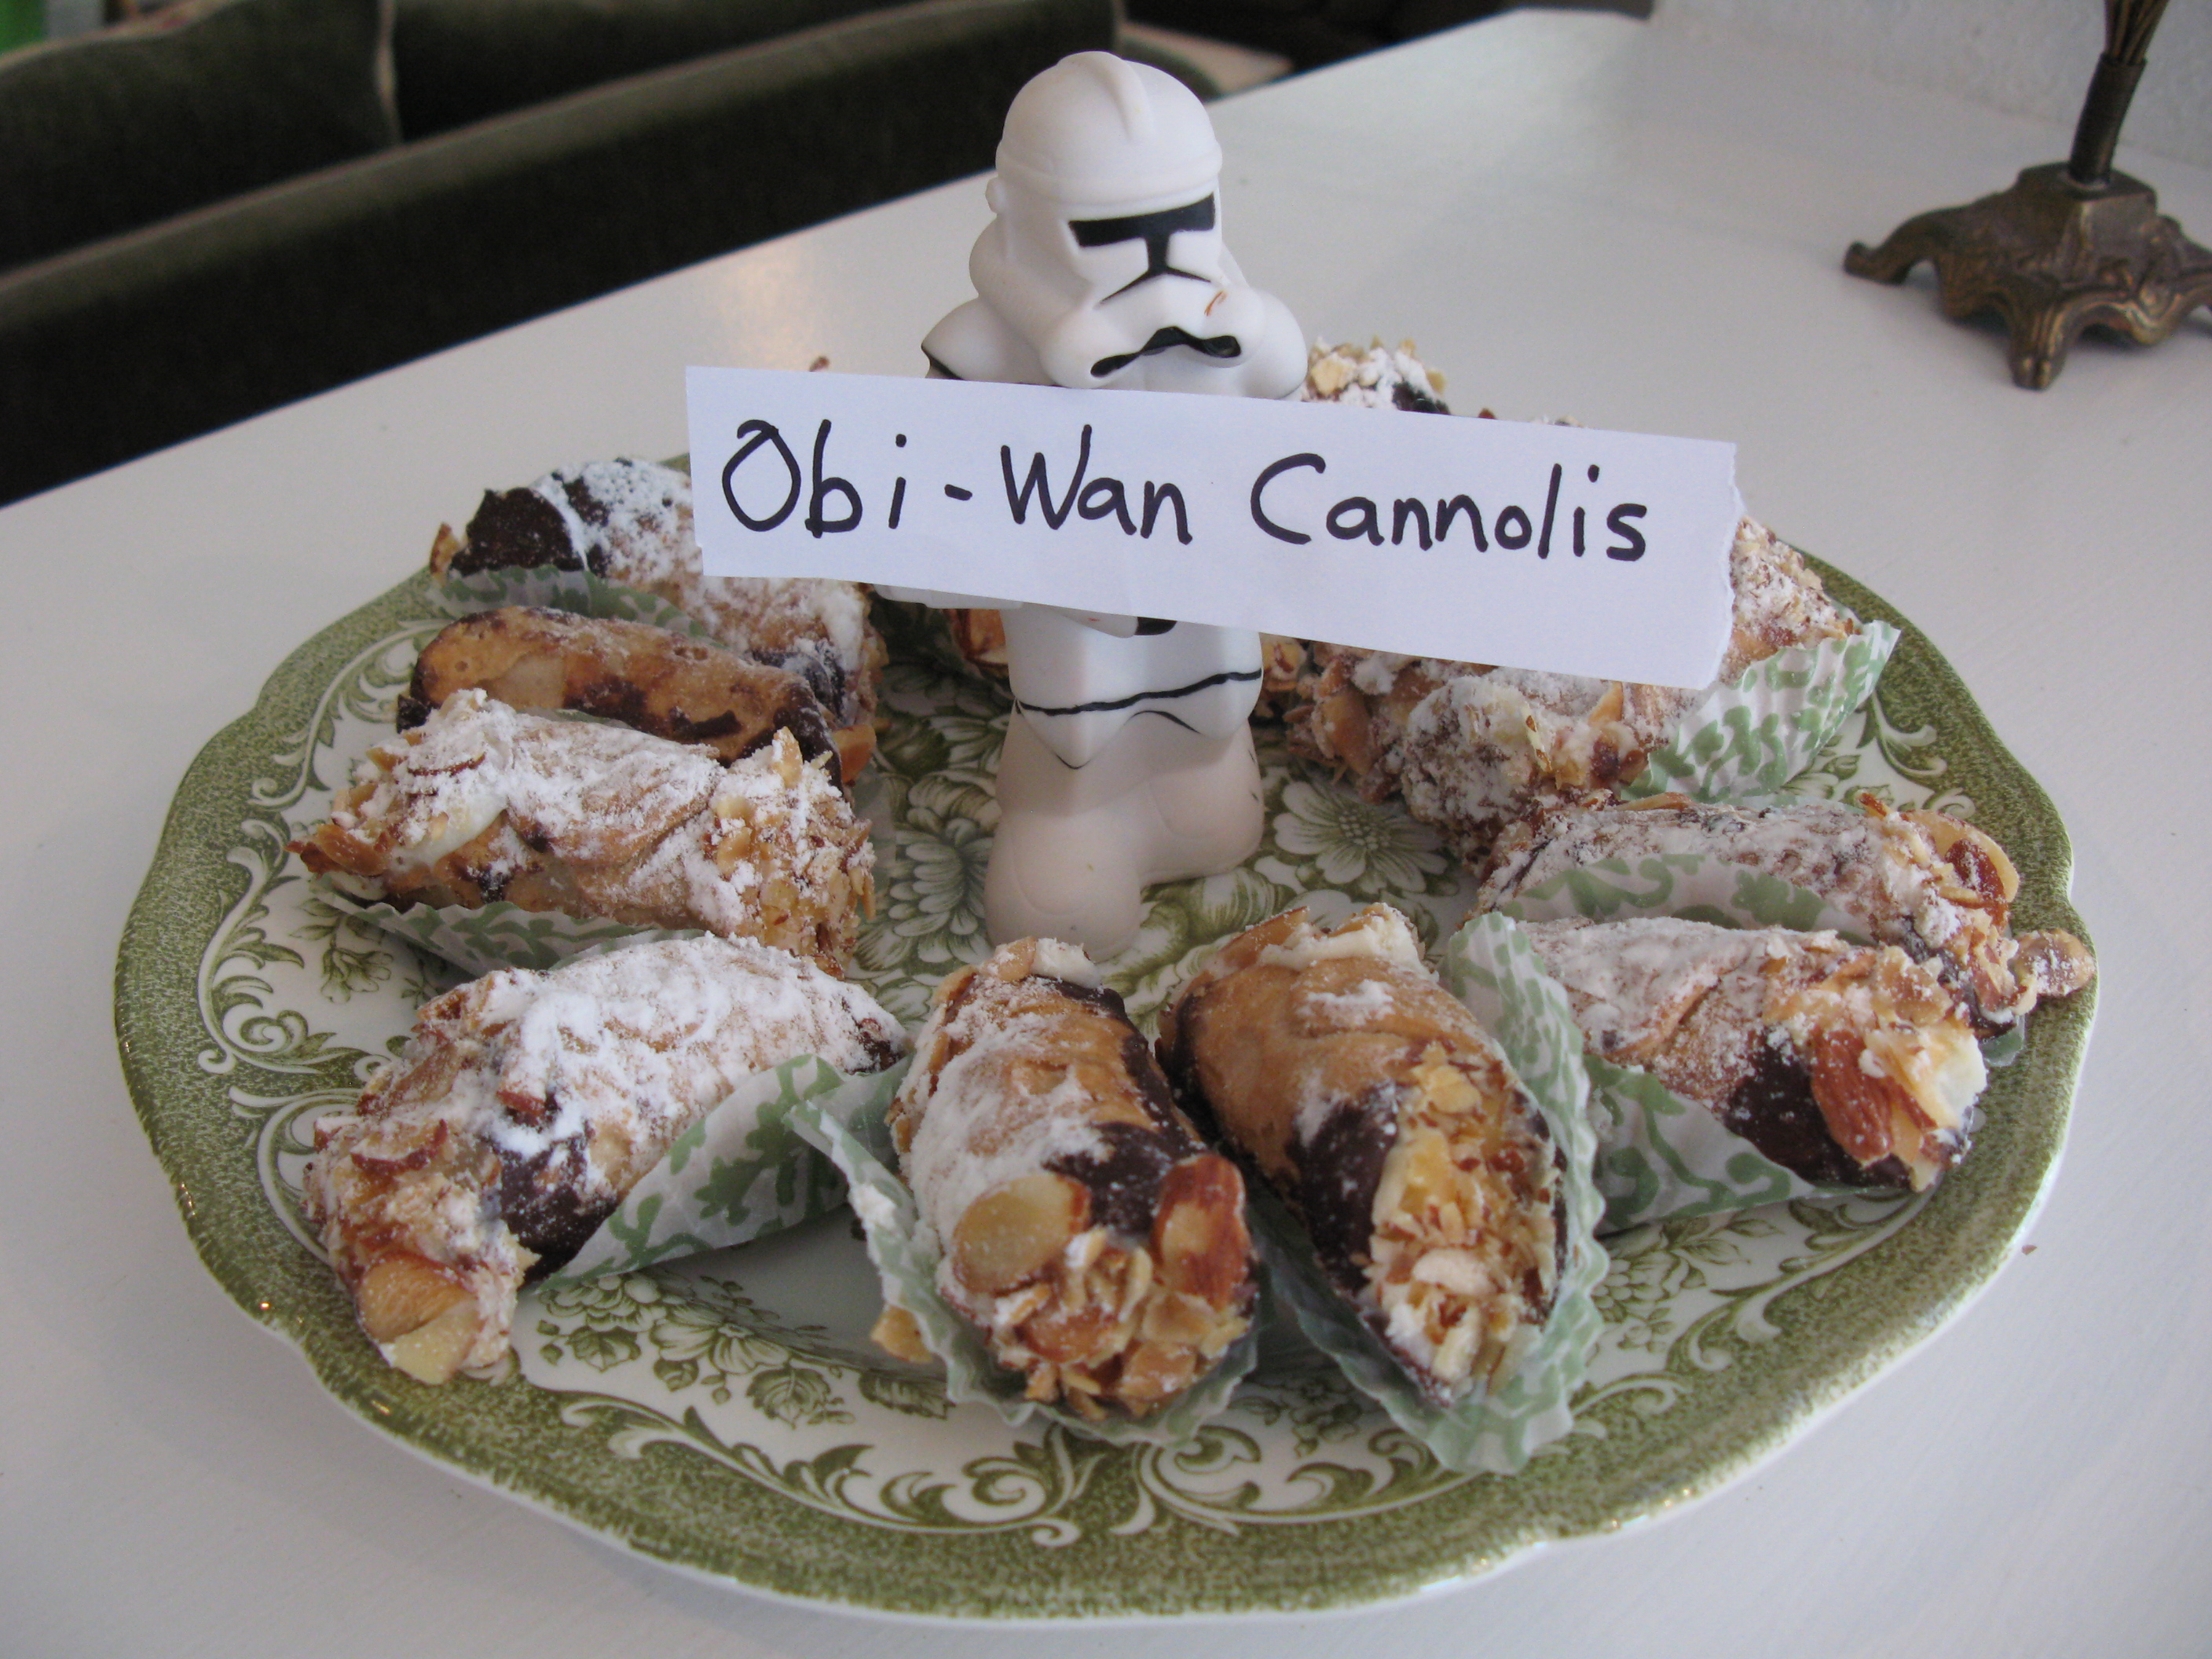 Obi-Wan Cannolis??? We bought these just for the joke!